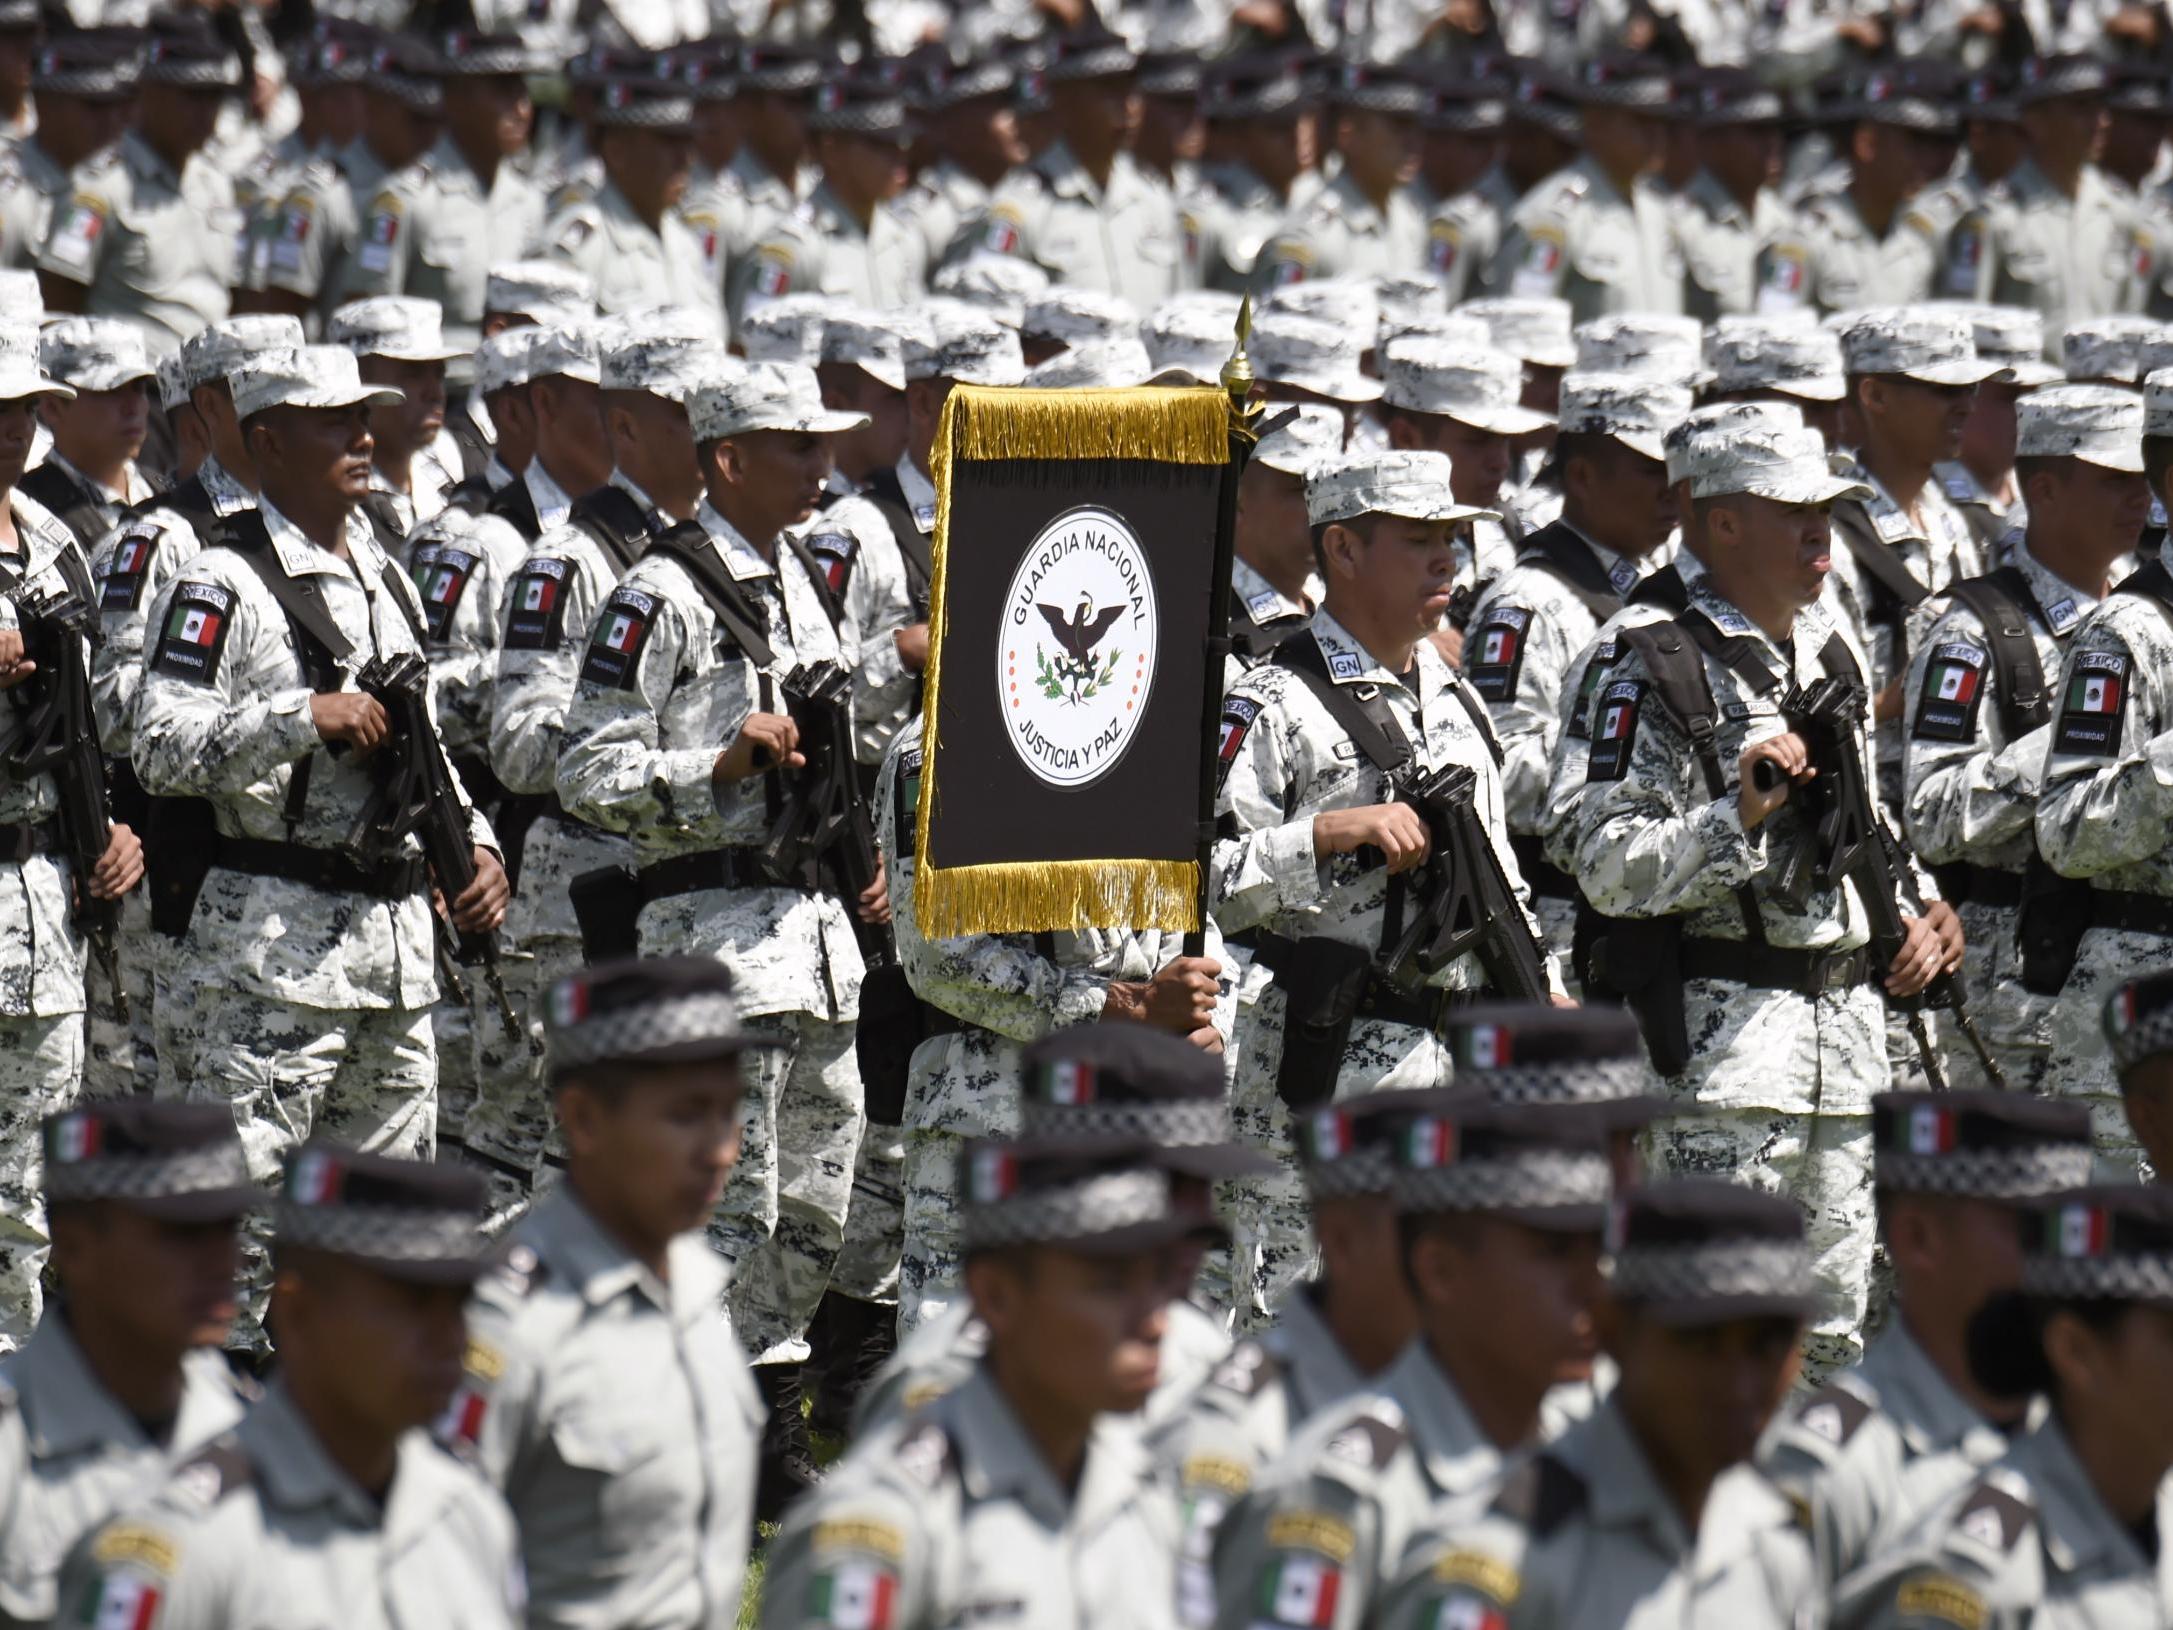 Mexico's president expressed a wish to replace the army with the new National Guard